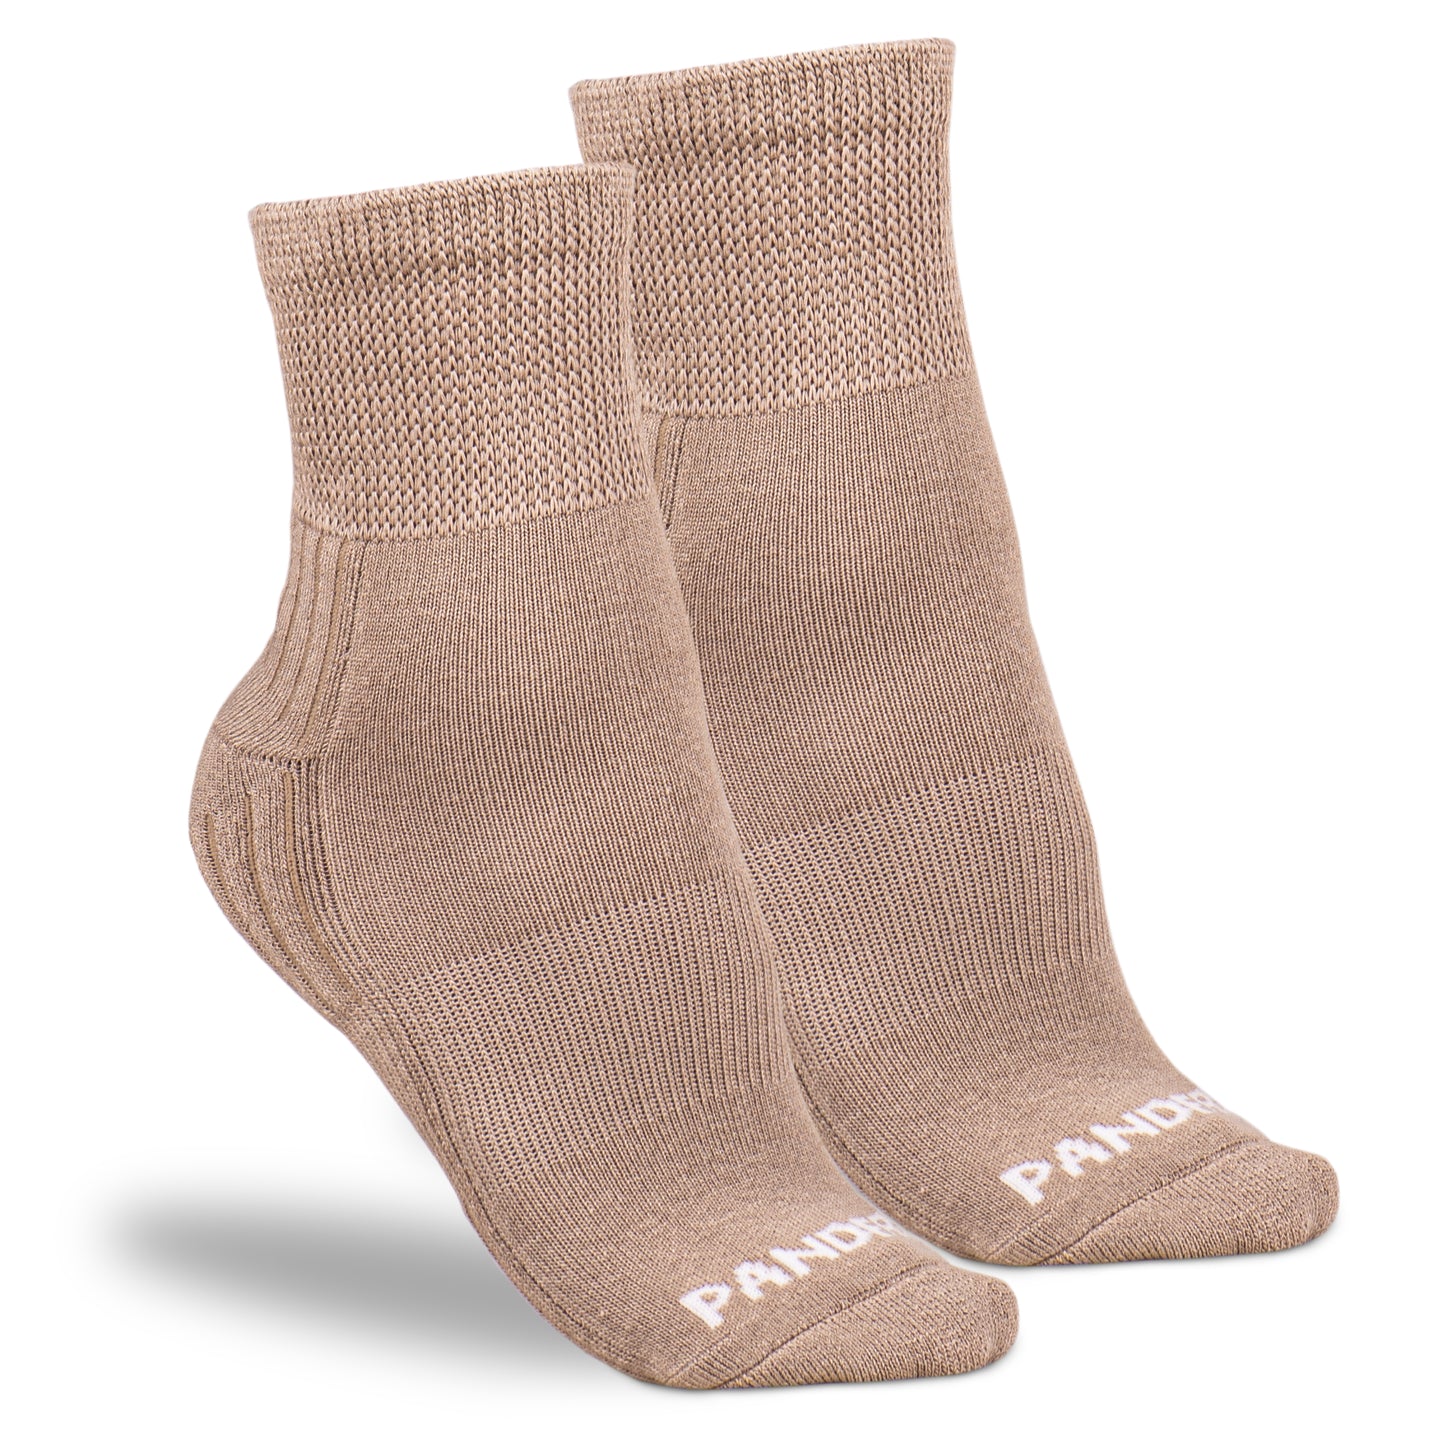 PANDERE Ankle Socks with Relaxed Fit Tops - Bundle of 3 pair